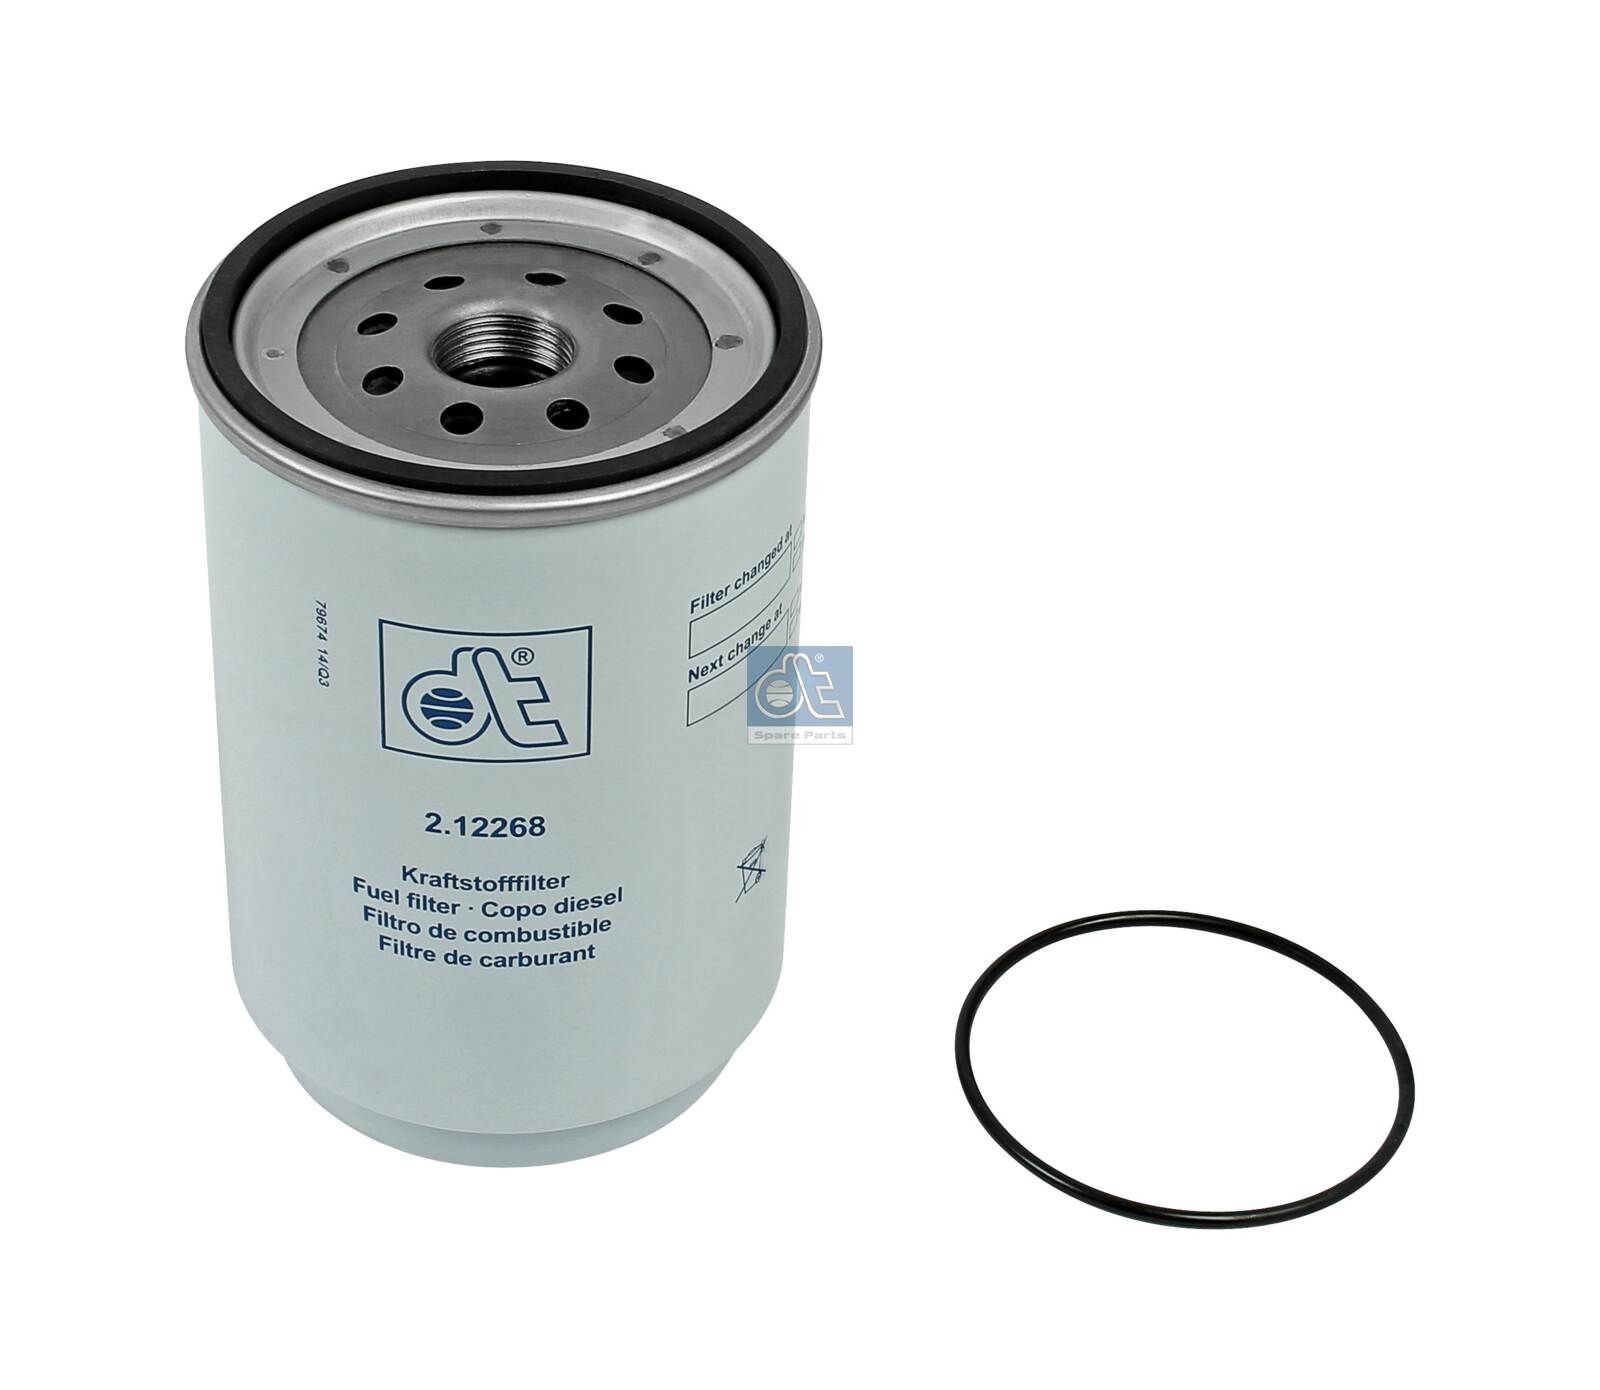 WK 11 001 x DT Spare Parts 2.12268 Fuel filter 21380488